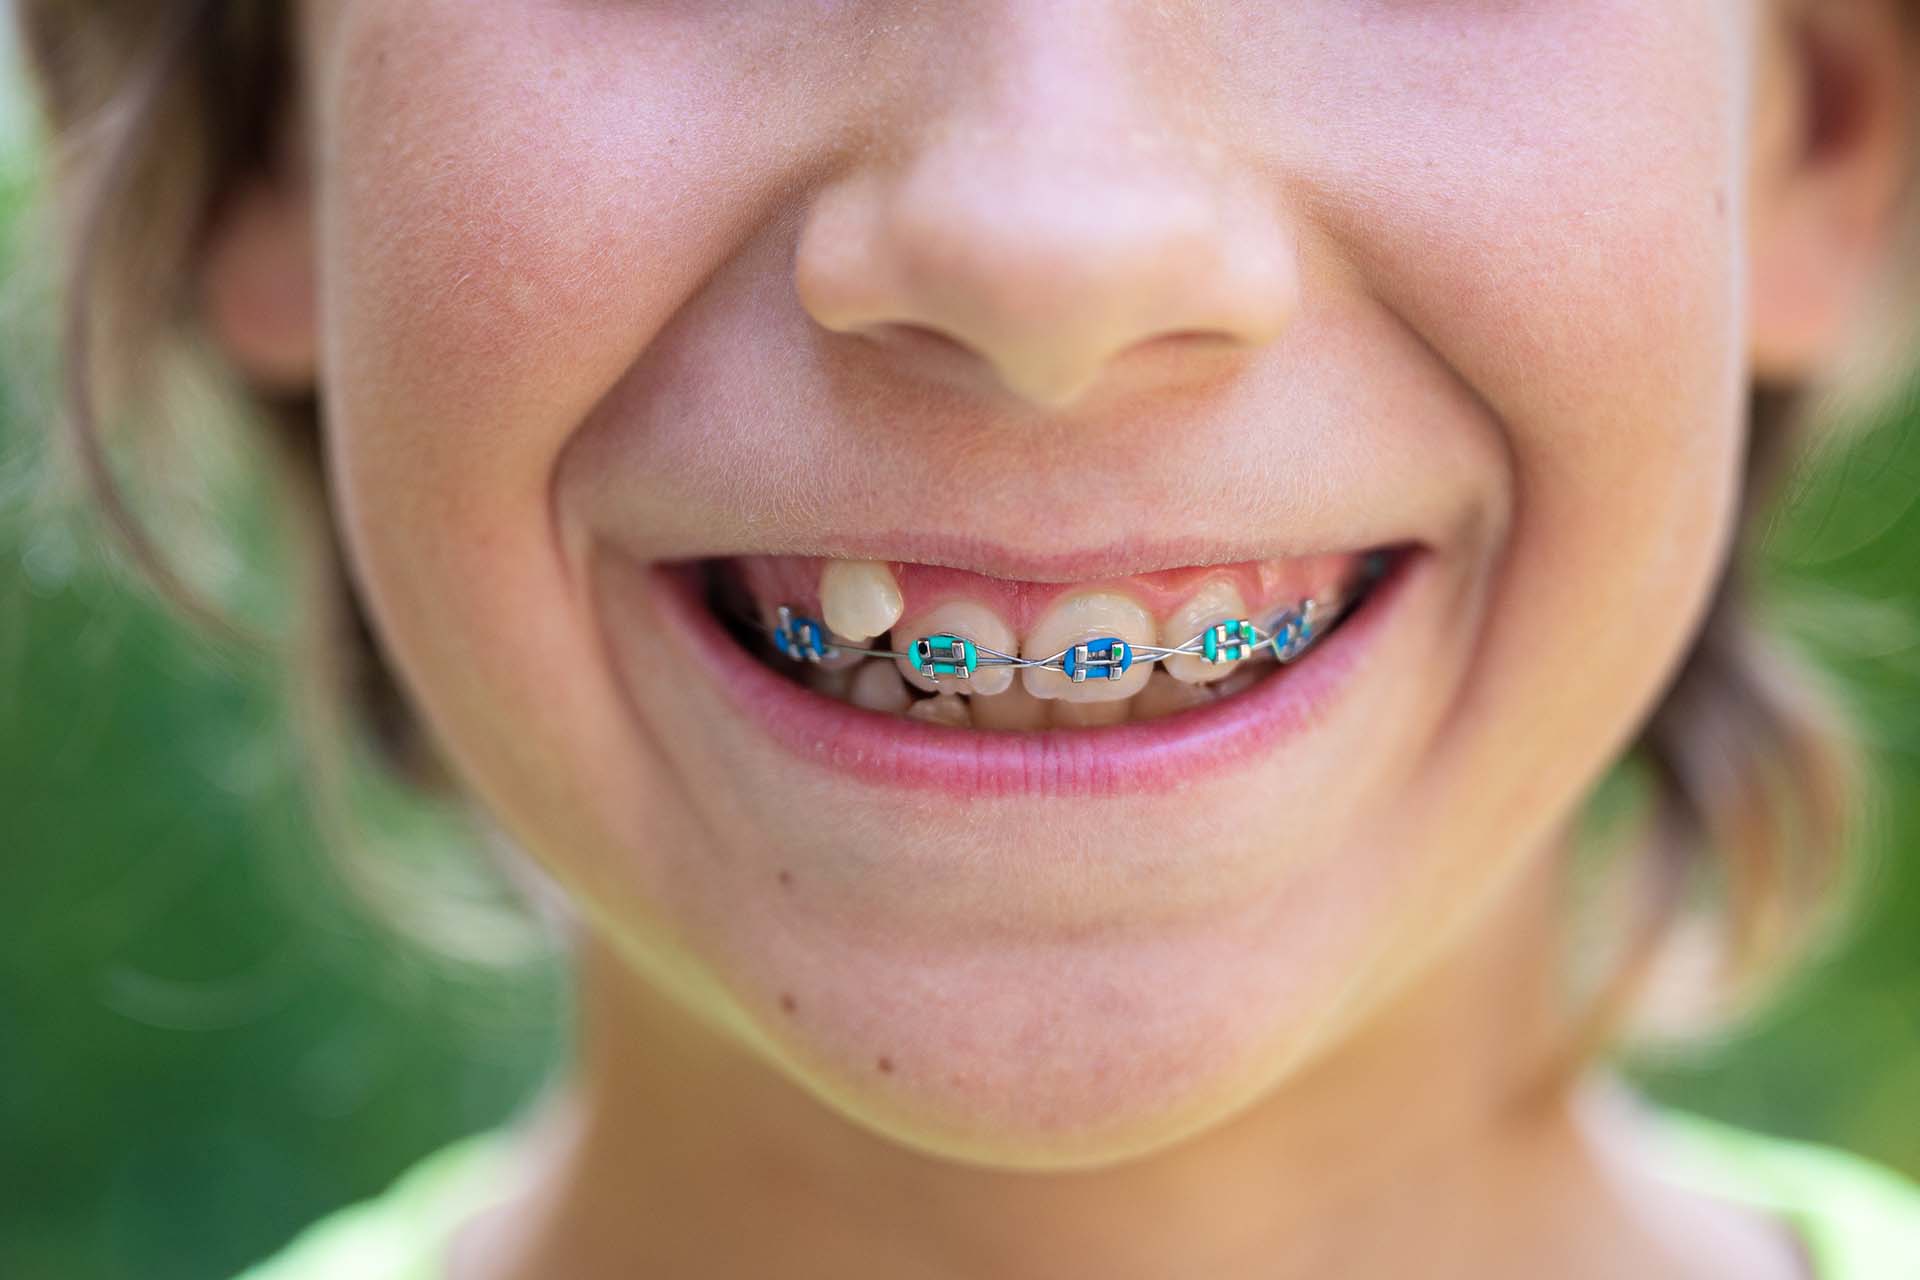 Child with colored rubber bands on braces